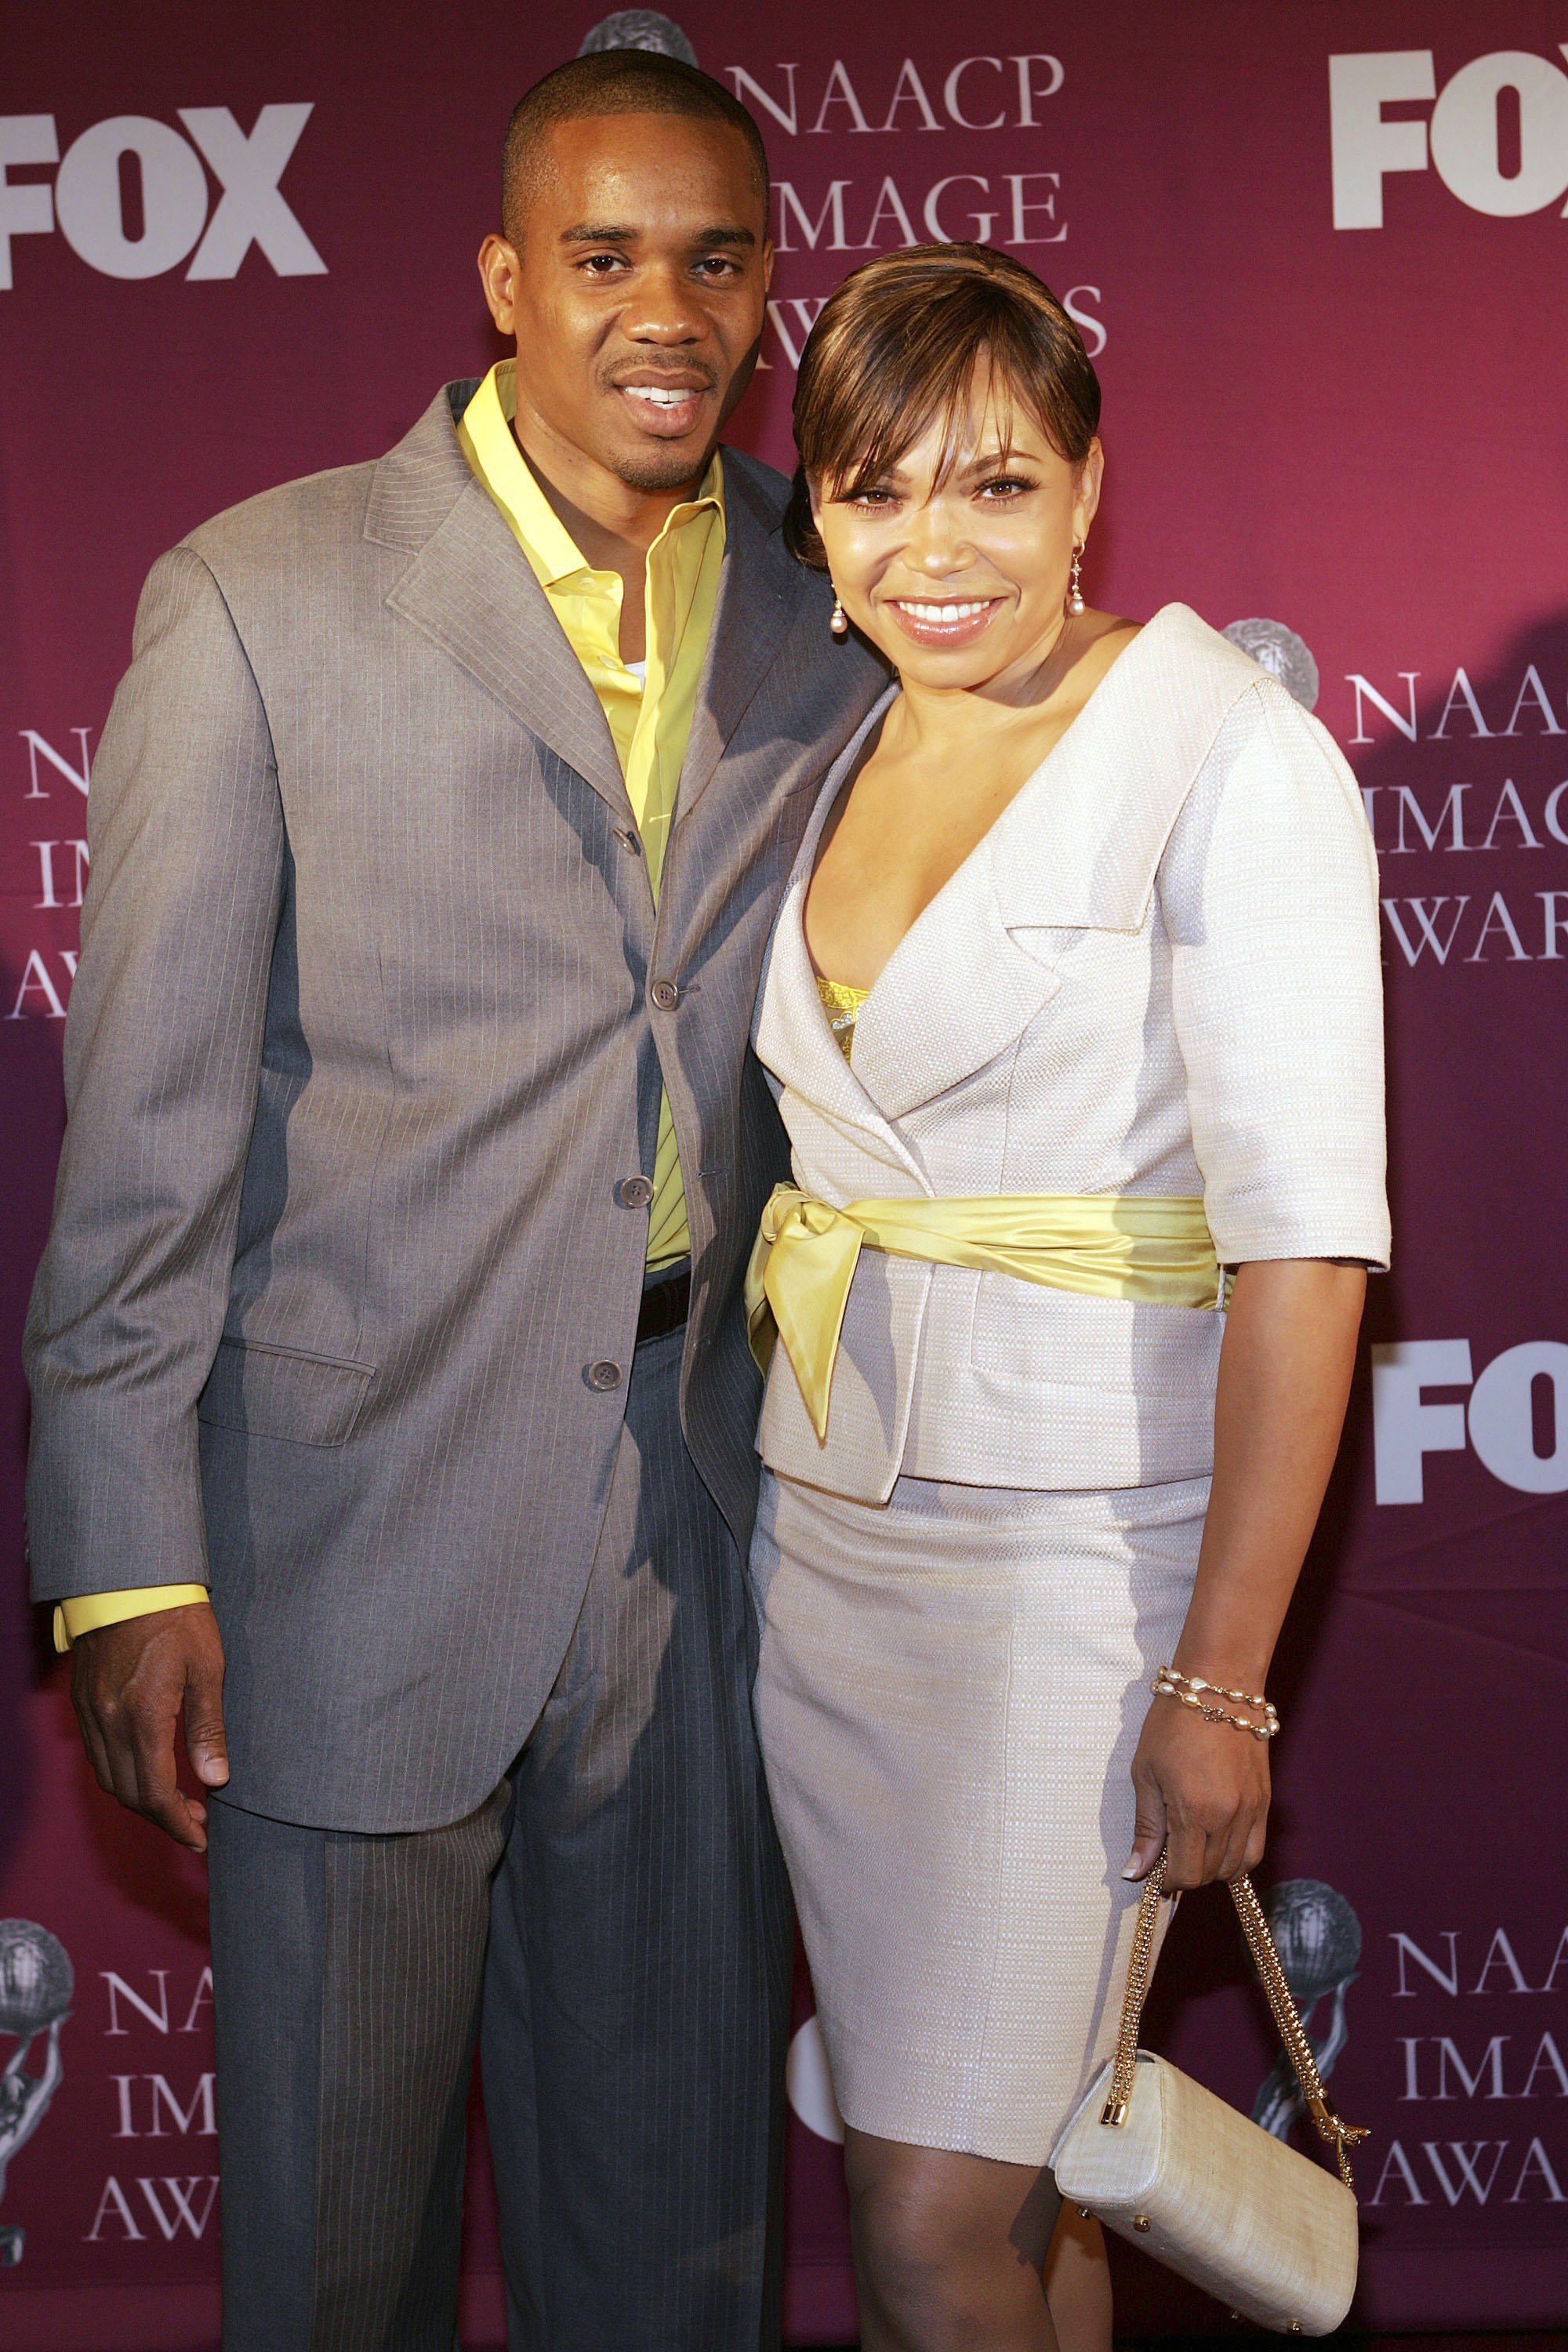 Duane Martin and Tisha Campbell when they were still married in 2005. | Photo: Getty Images